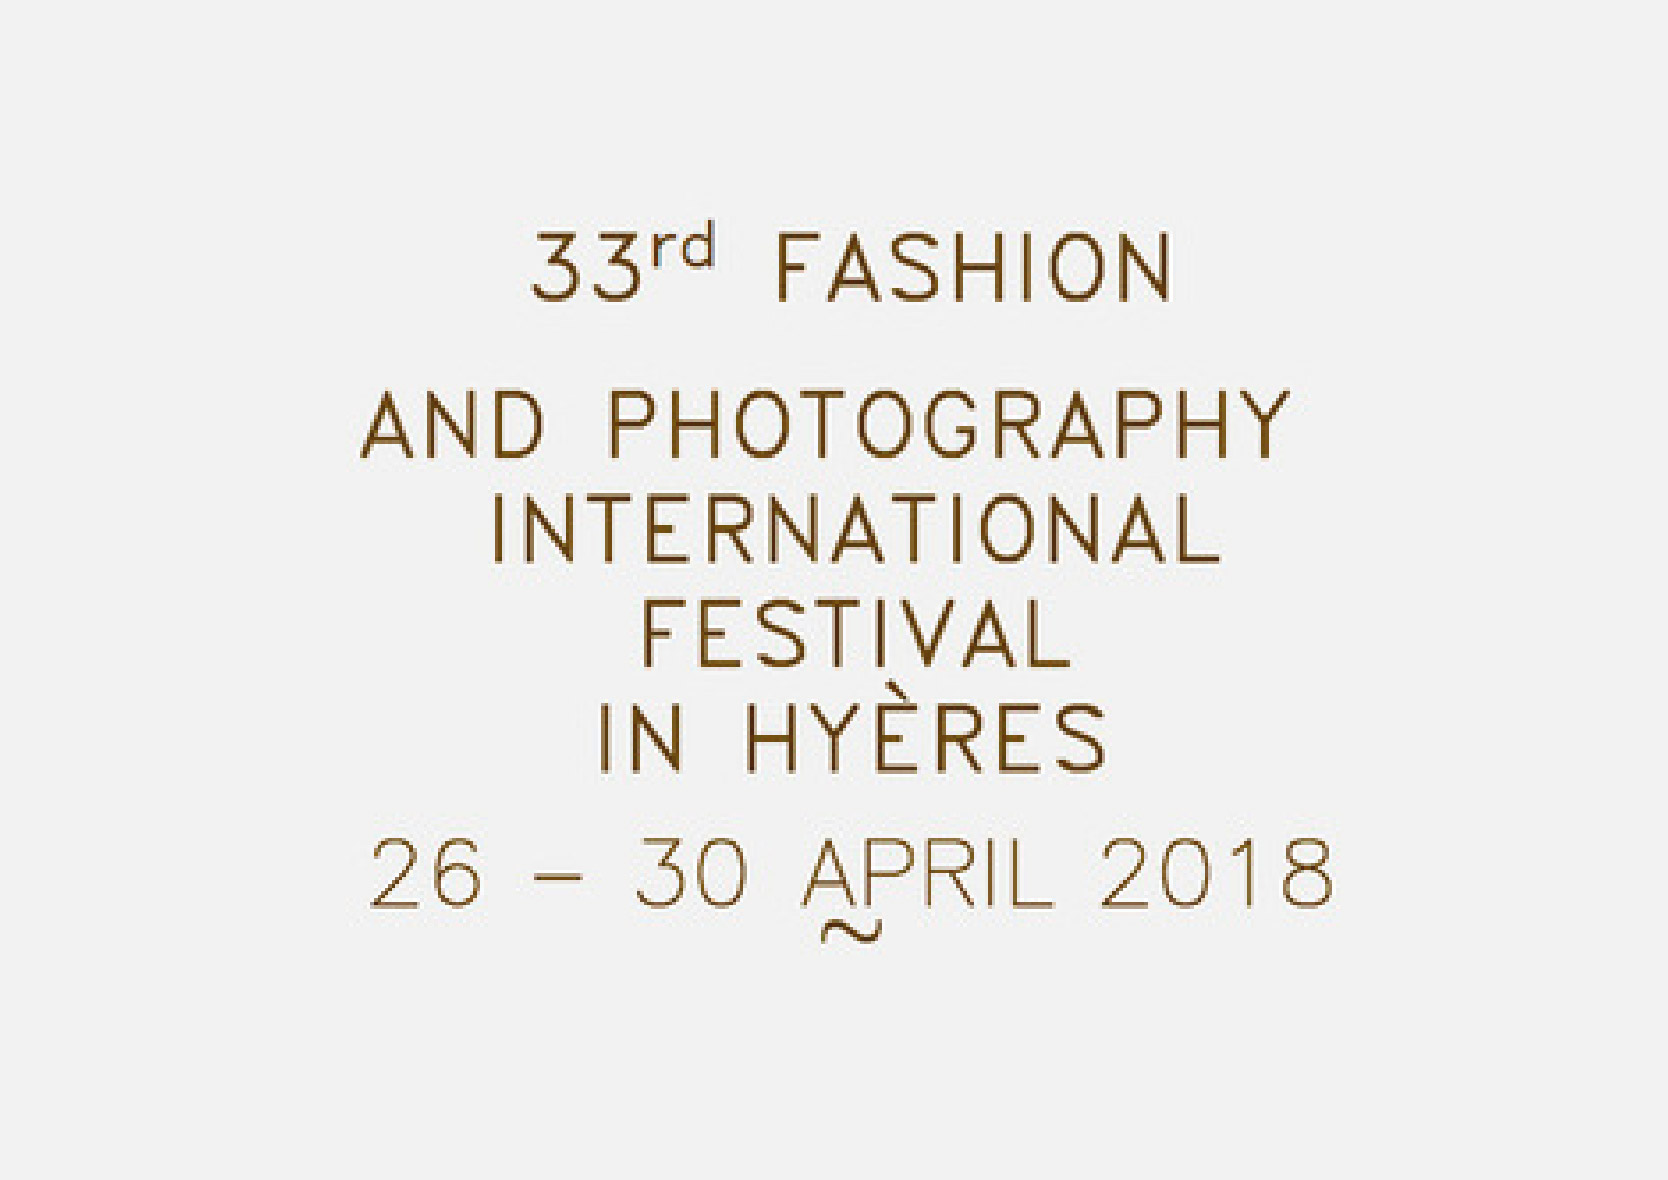 Hyères International Festival of Fashion, Photography and Fashion Accessories 2018